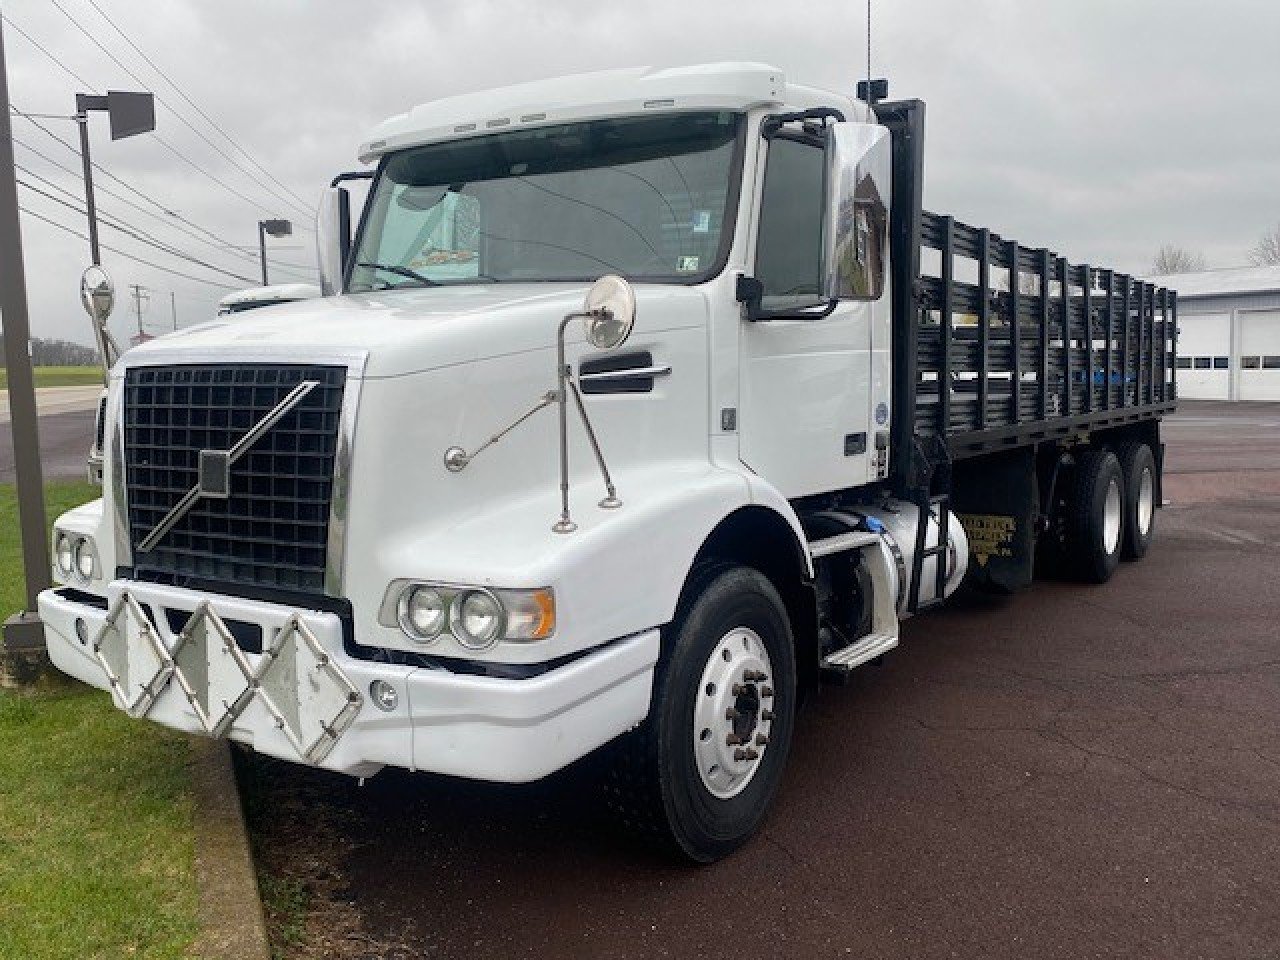 Used Truck Inventory - 1001763 01 - 151